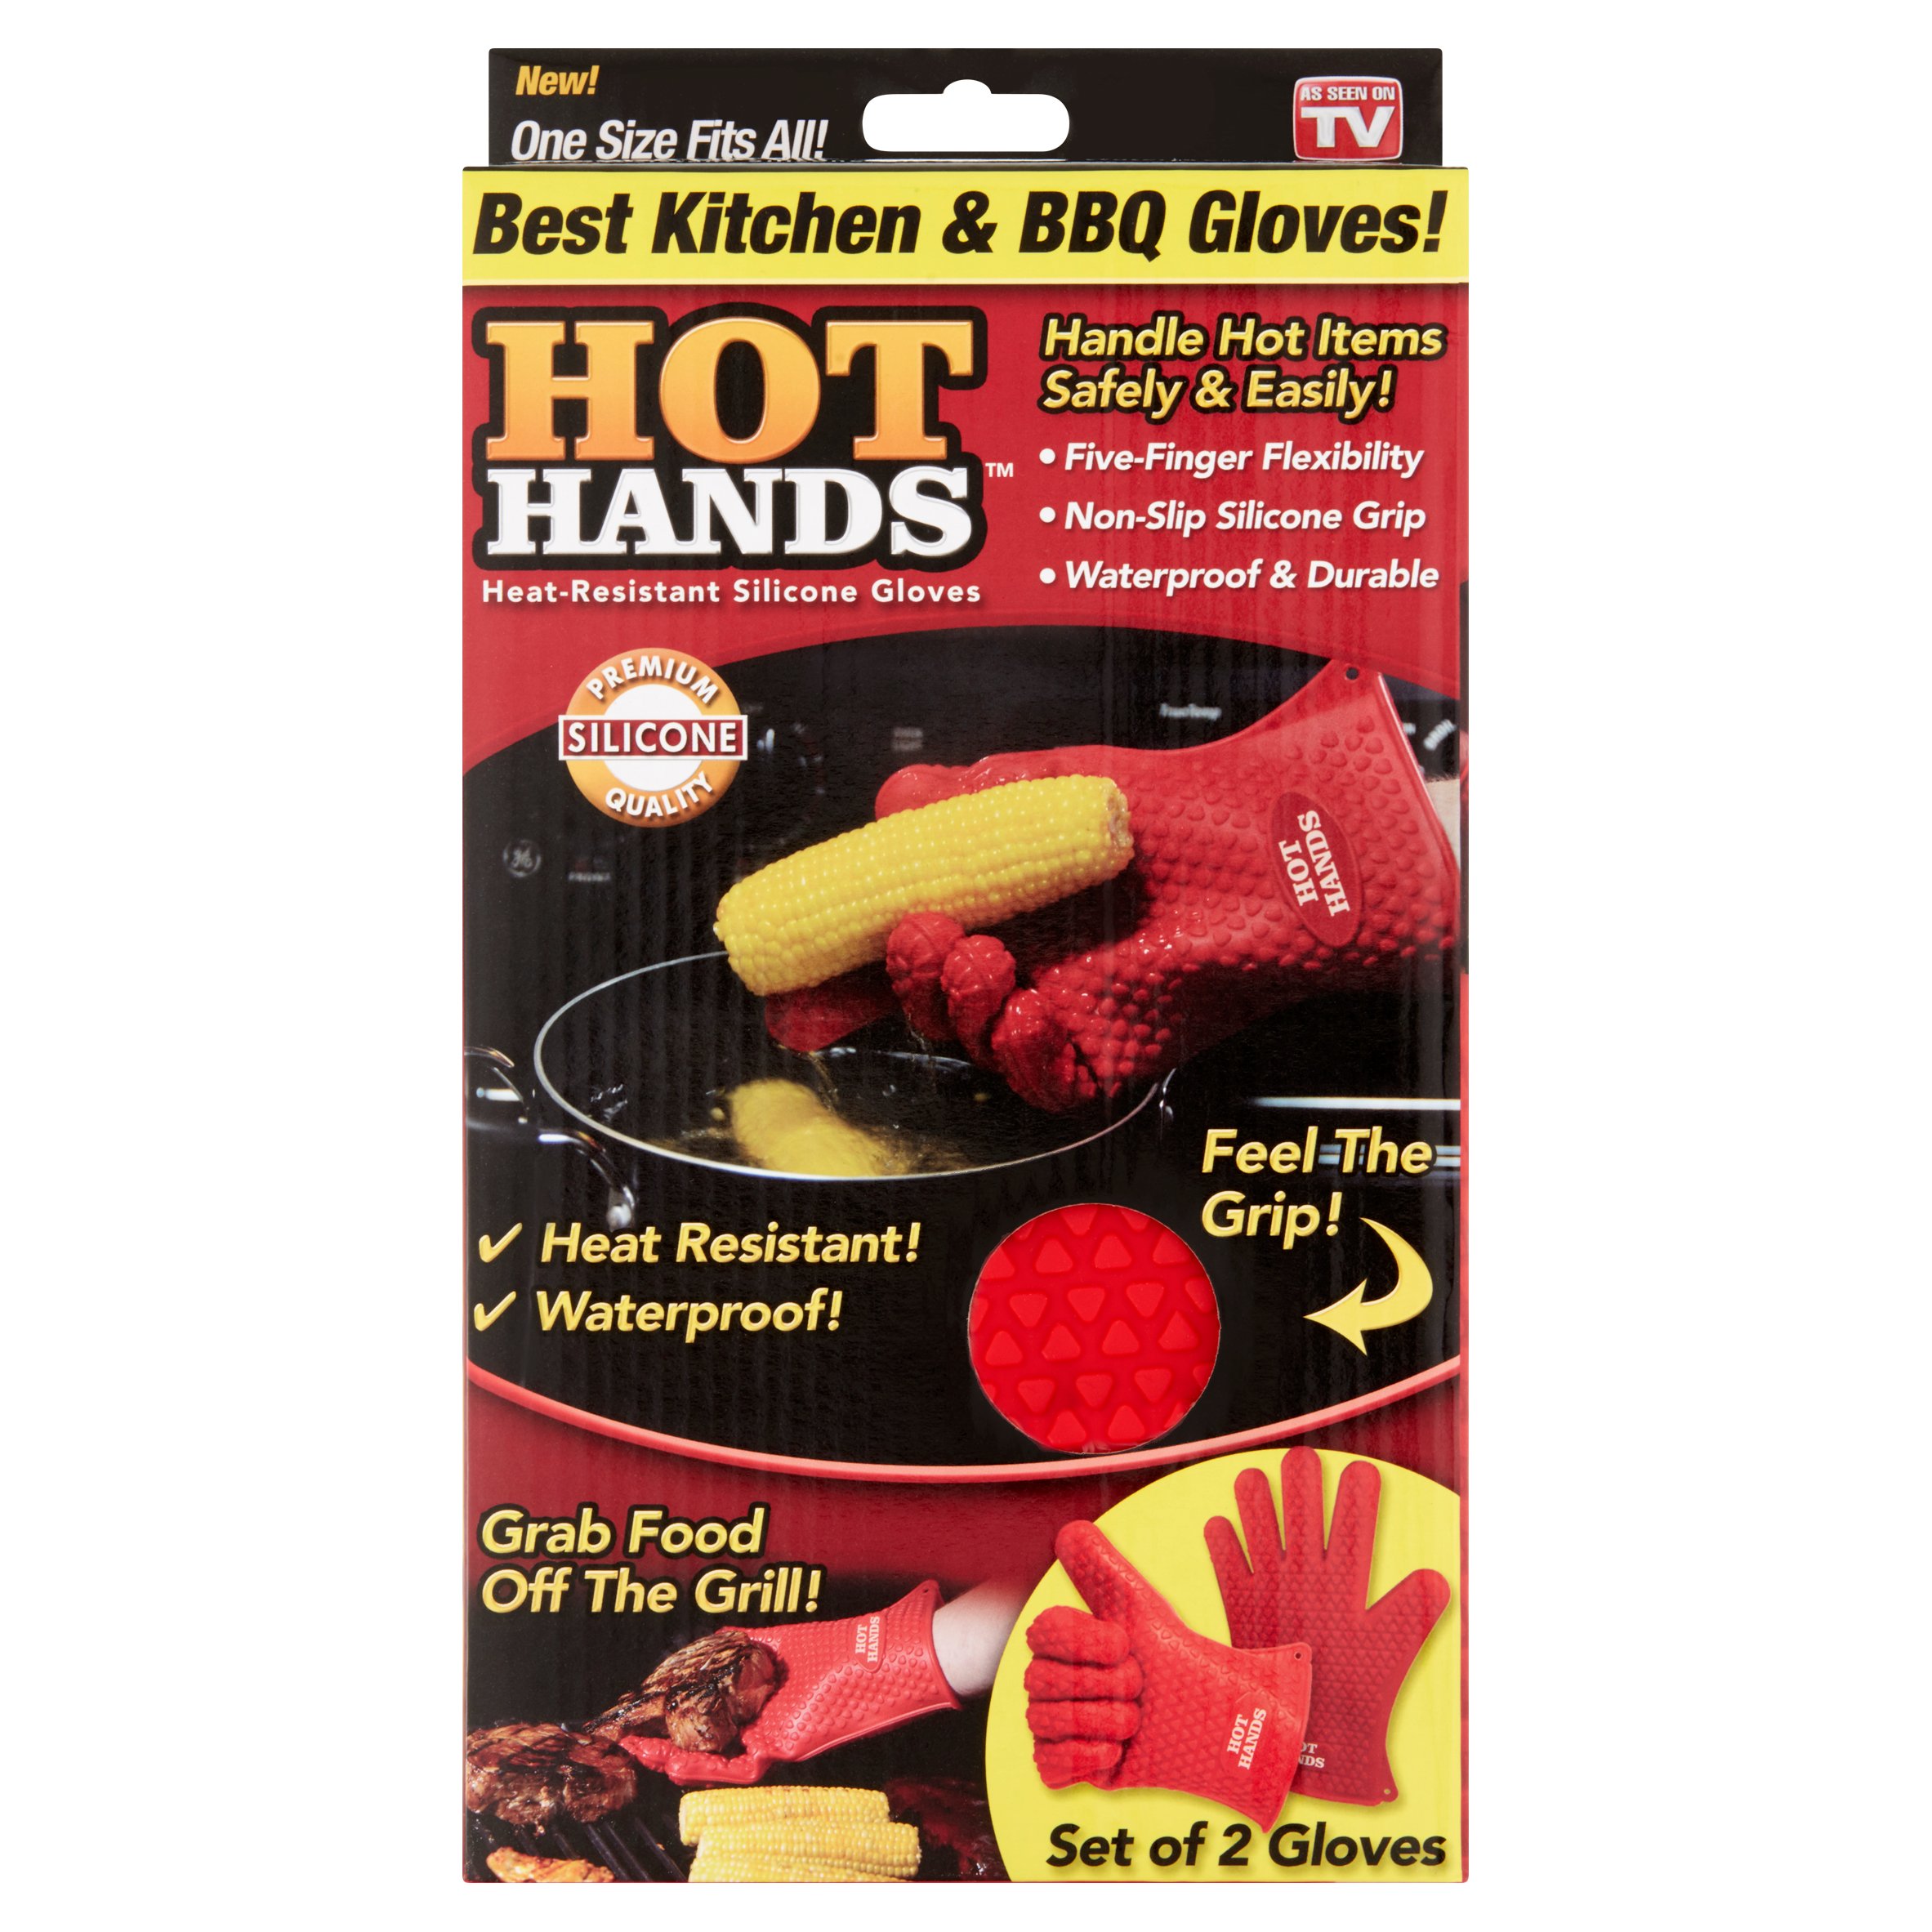 Hot Hands Heat-Resistant Silicone Gloves - image 1 of 5